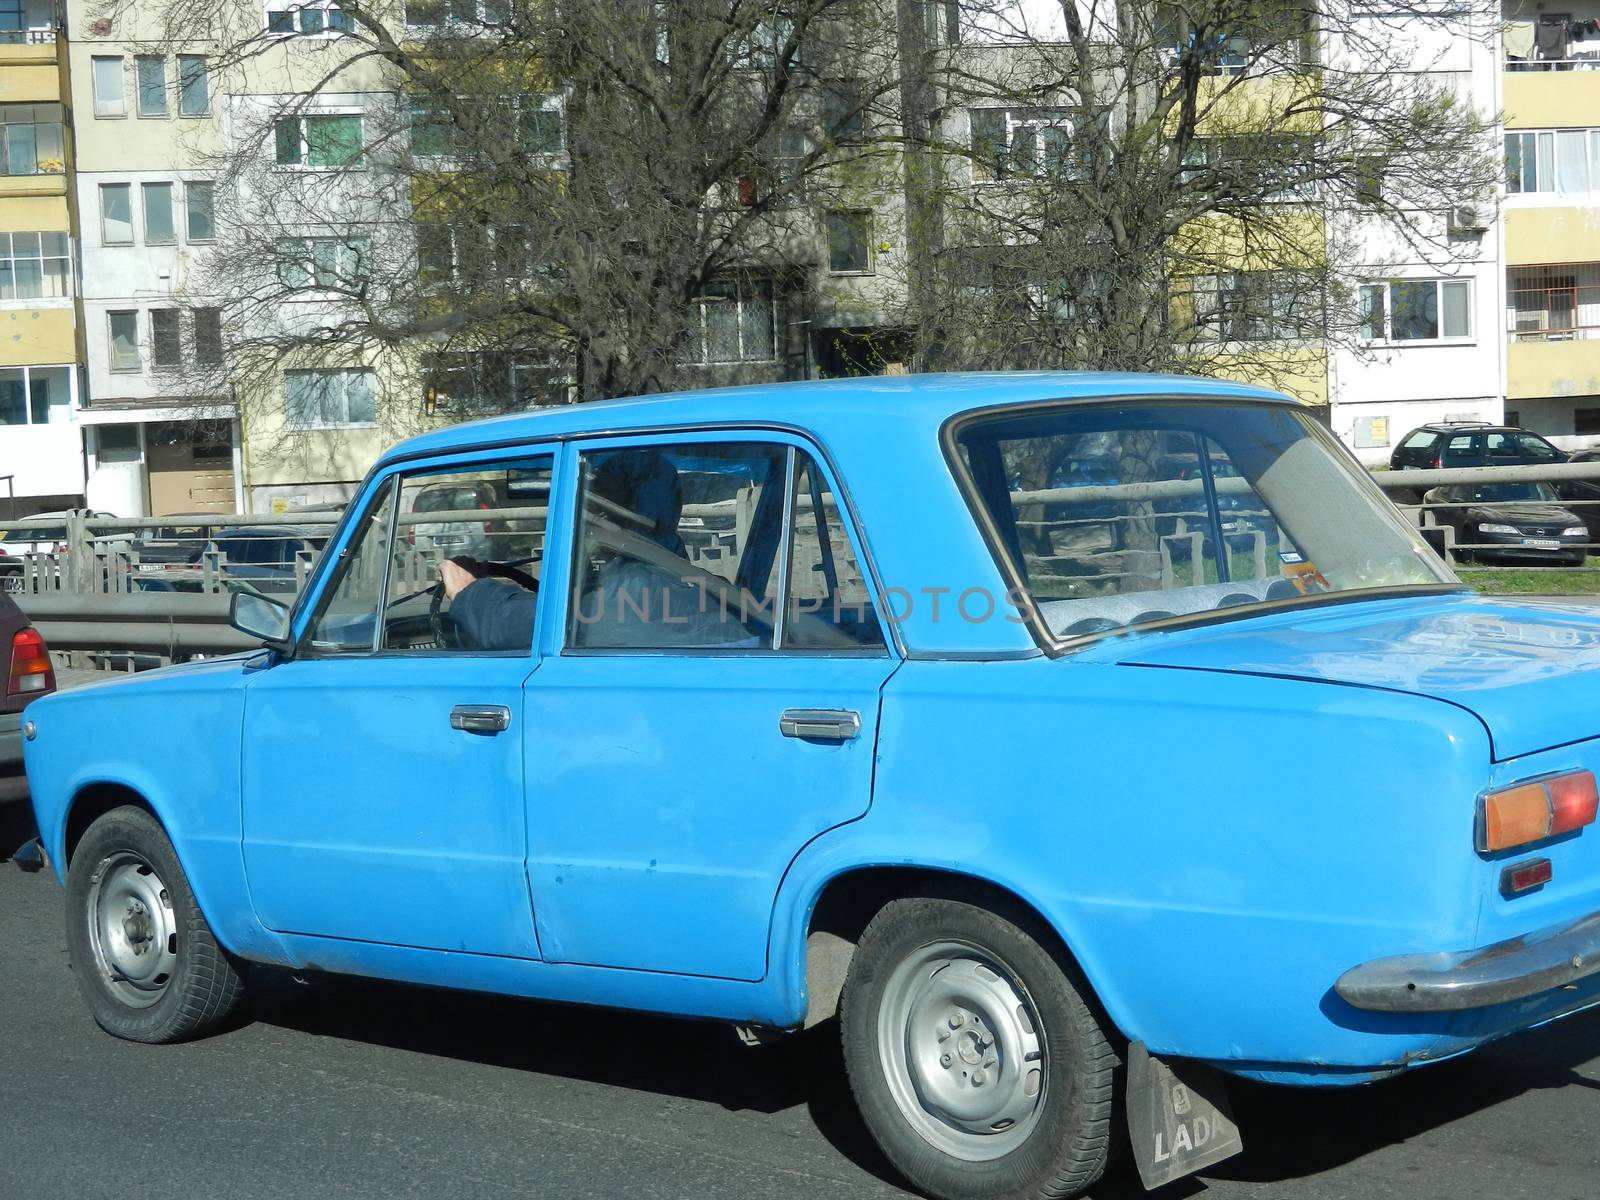 Burgas, Bulgaria - April 21 2011: Old blue Lada 2101 (VAZ-2101) in the street of the city of Burgas in Bulgaria